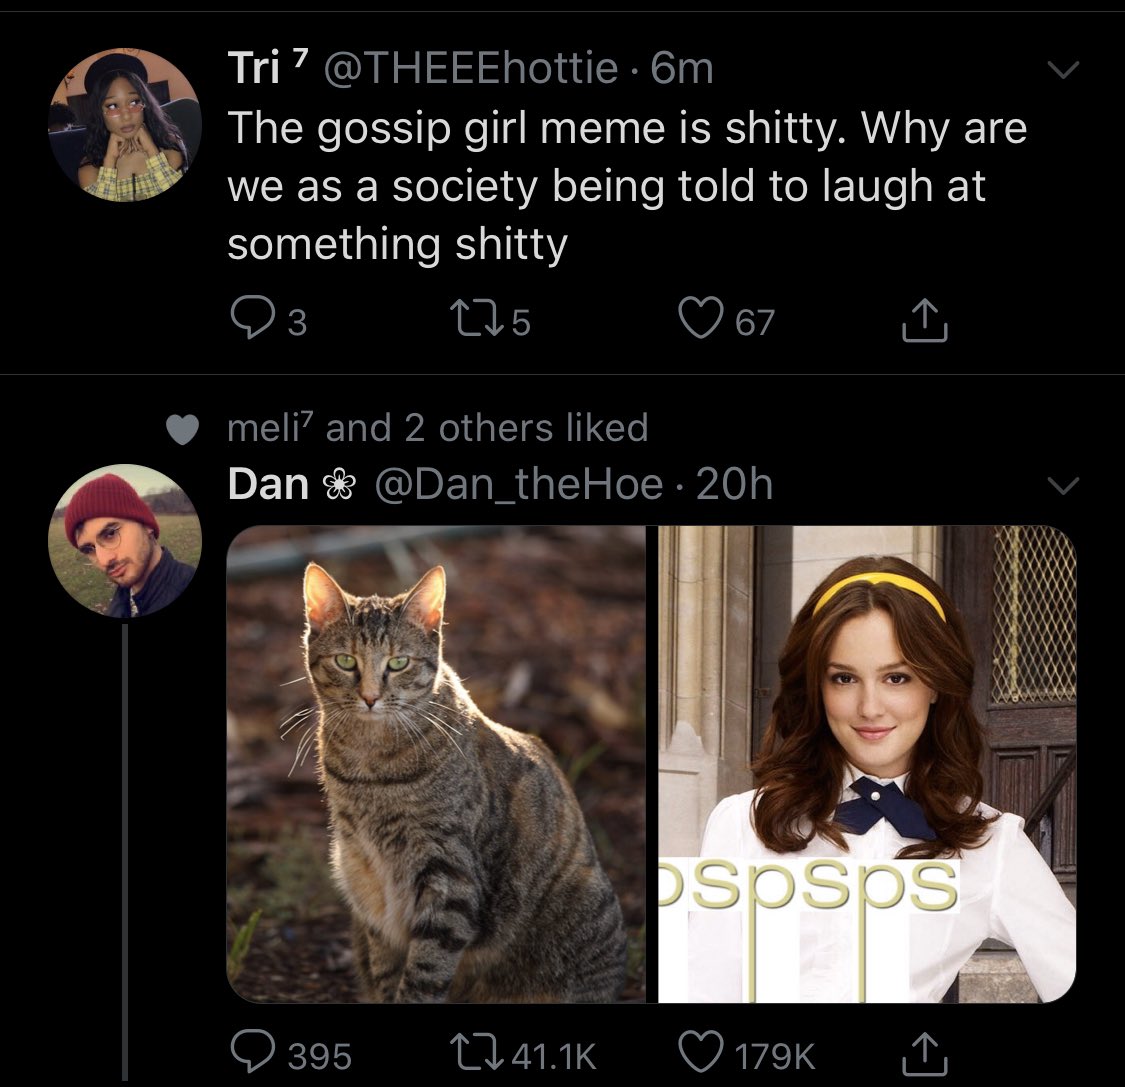 Tri Da Villain The Gossip Girl Meme Is Shitty Why Are We As A Society Being Told To Laugh At Something Shitty Twitter